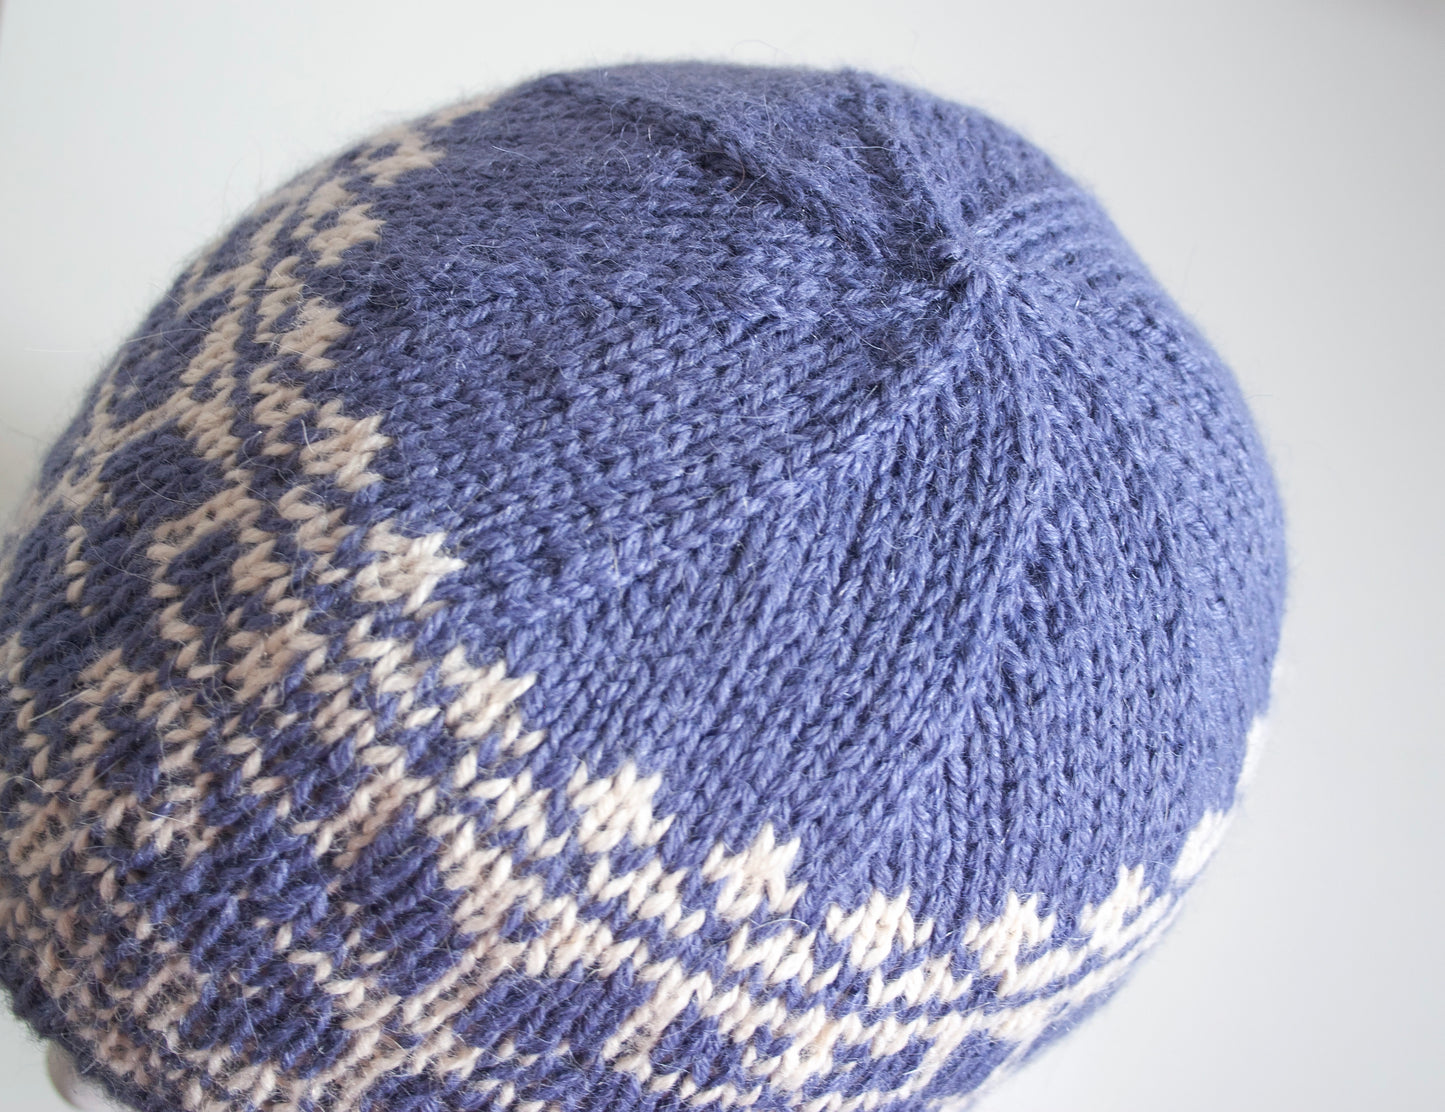 blue and white alpaca wool hand-knitted Fair Isle beanie hat in snowflake knitting pattern top view